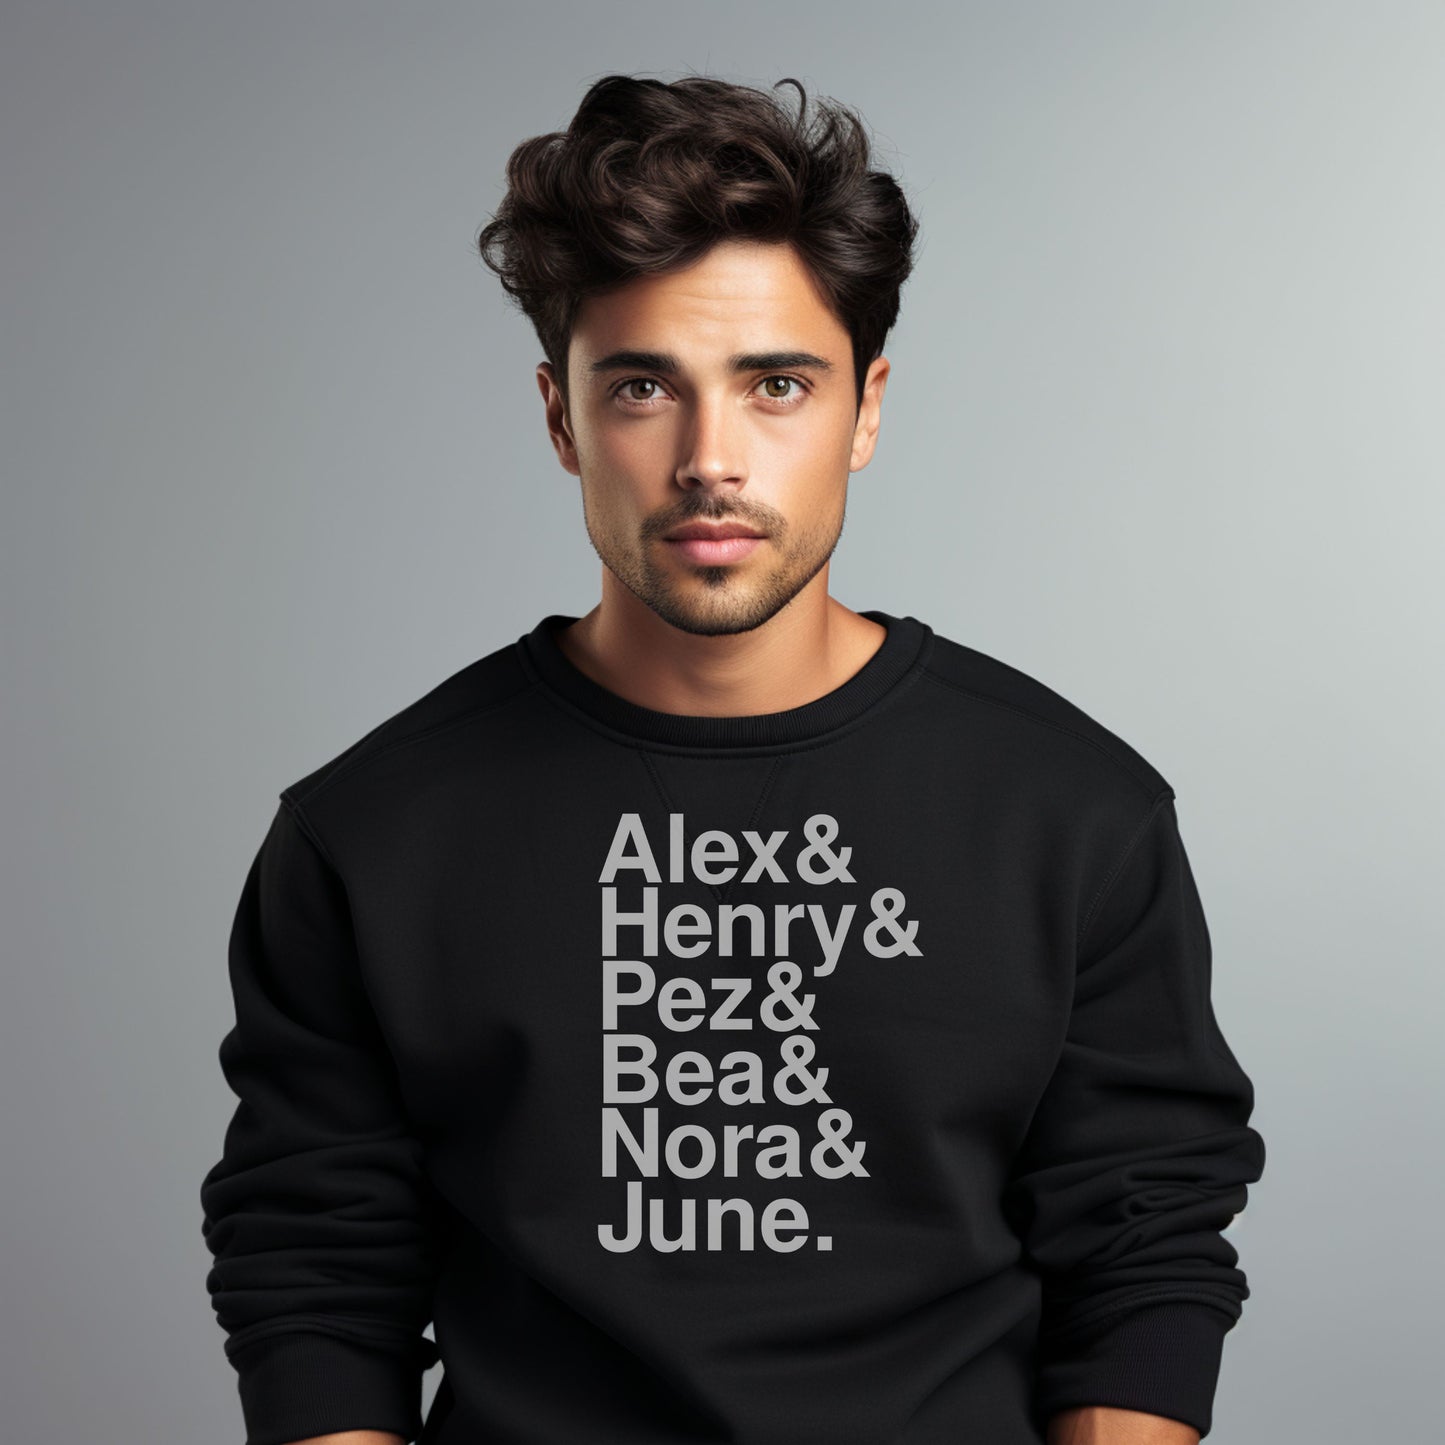 Red White & Royal Blue Character Names Sweatshirt, RWRB, Alex Claremont-Diaz, Prince Henry, Gifts for Readers, Book Lover, LGBTQ Queer